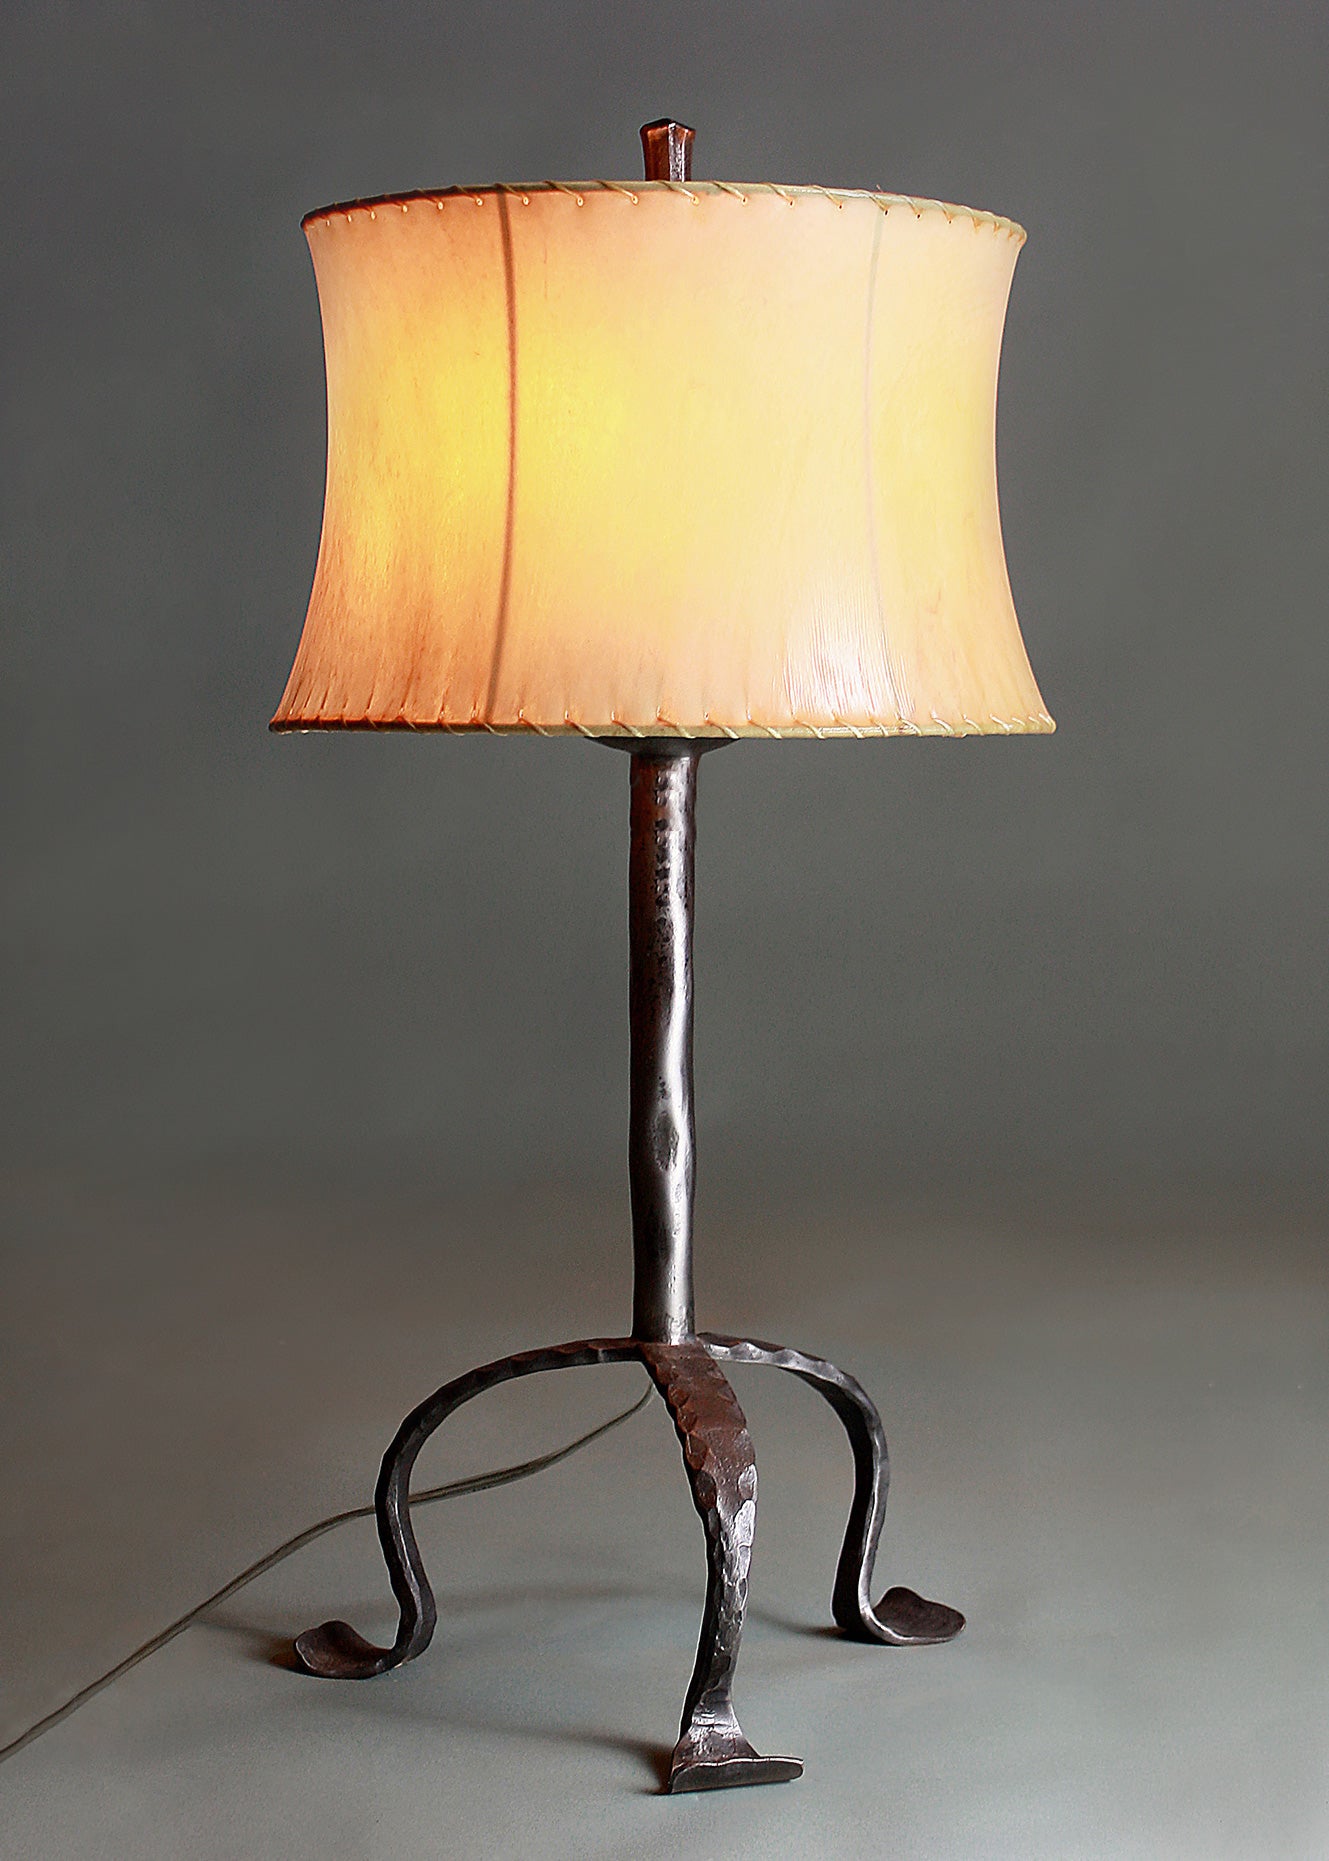 Simply Santa Fe Lamp by Christopher Thompson Ironworks - shown with a contemporary sheepskin drum shade.